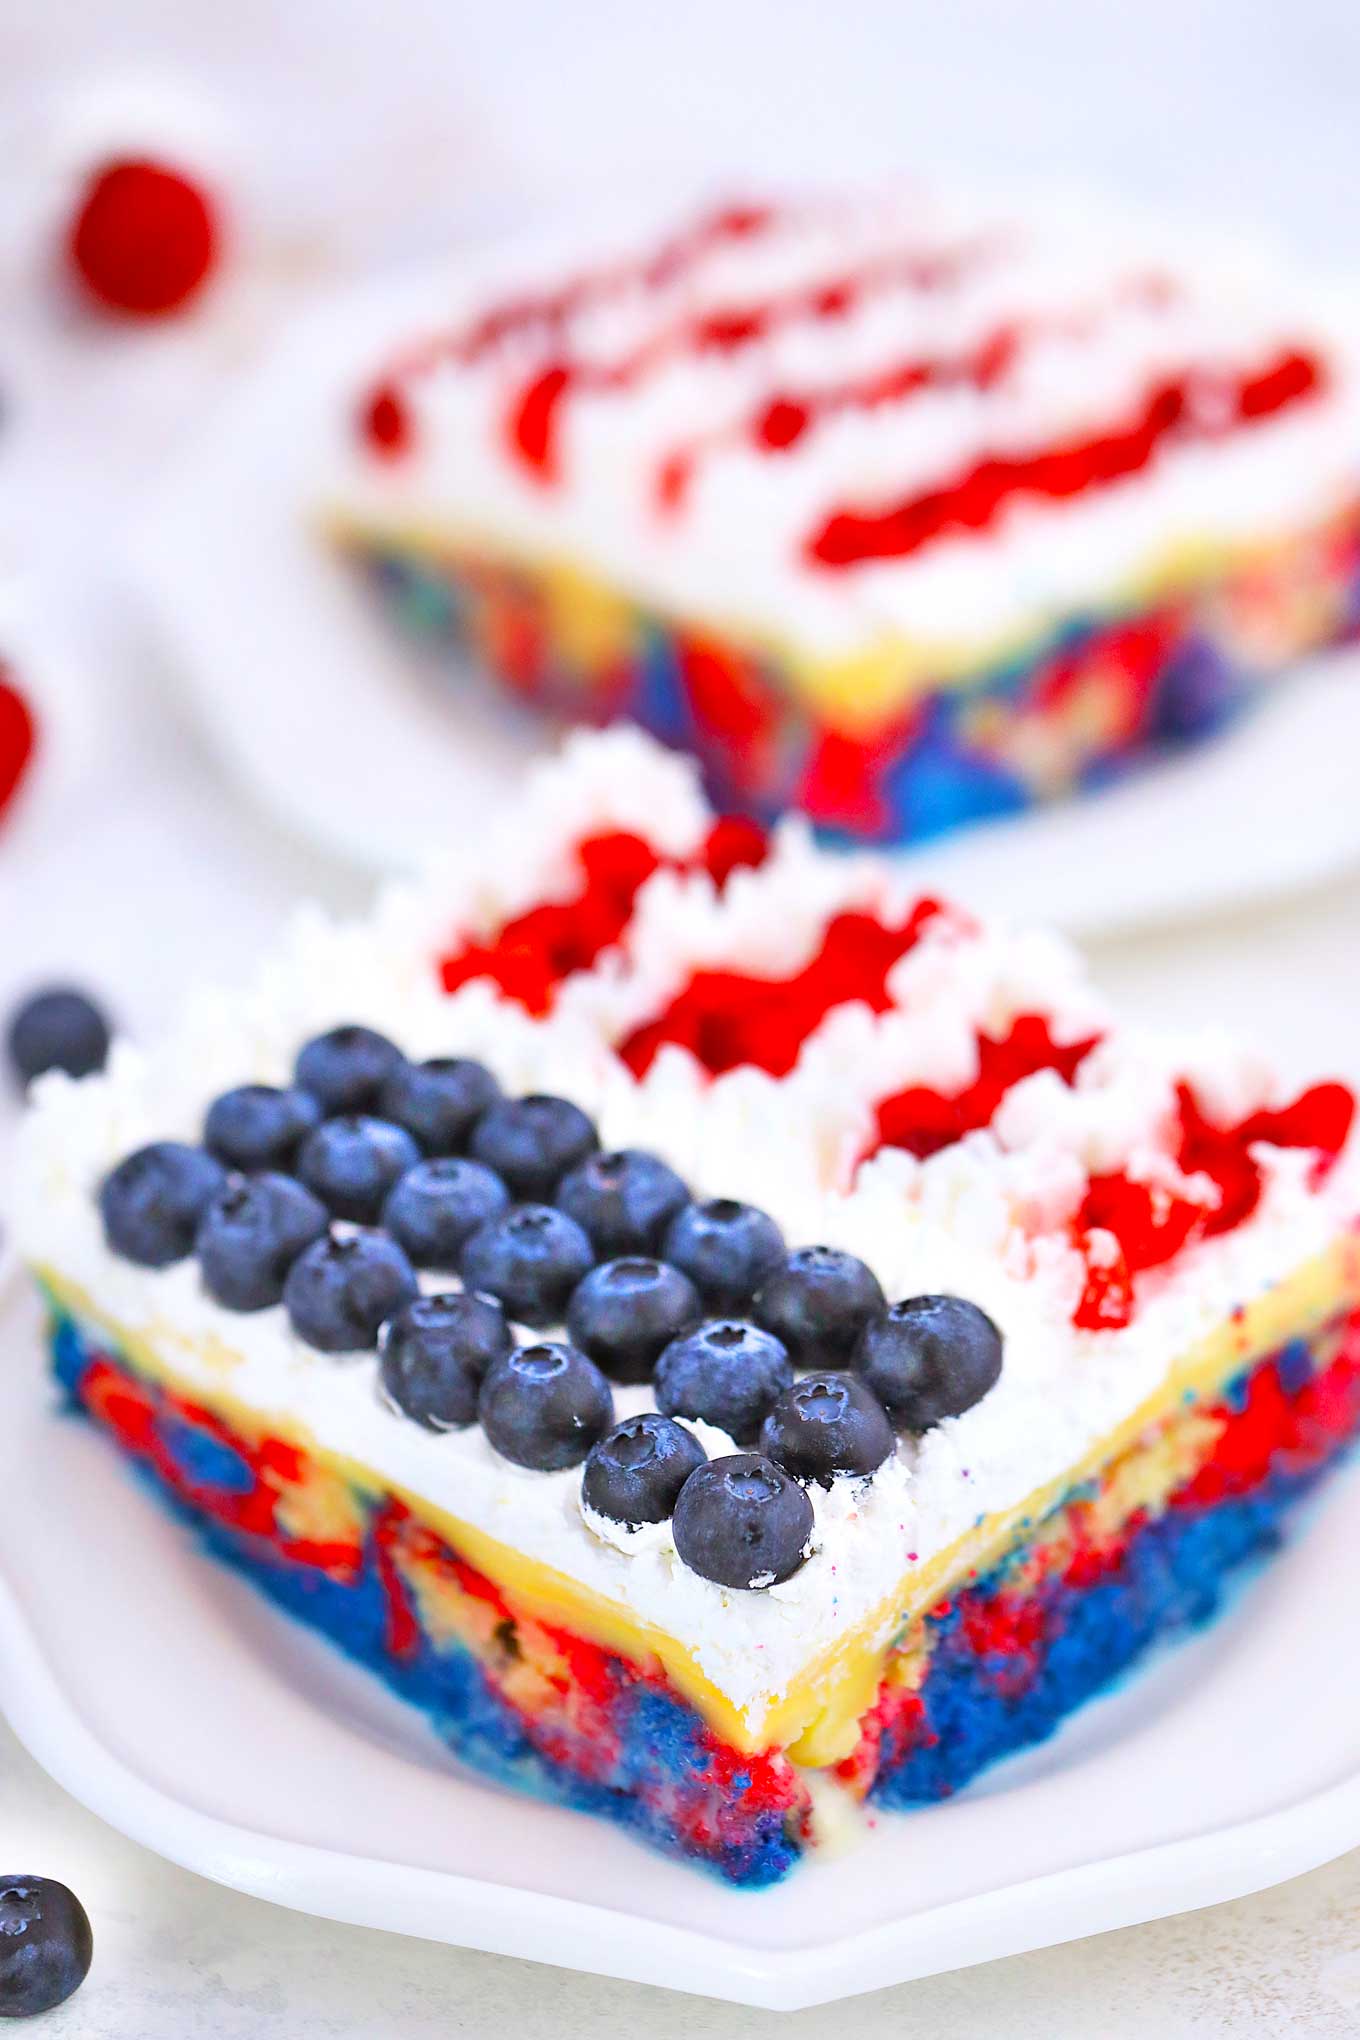 Patriotic Poke Cake Recipe [video] - Sweet and Savory Meals